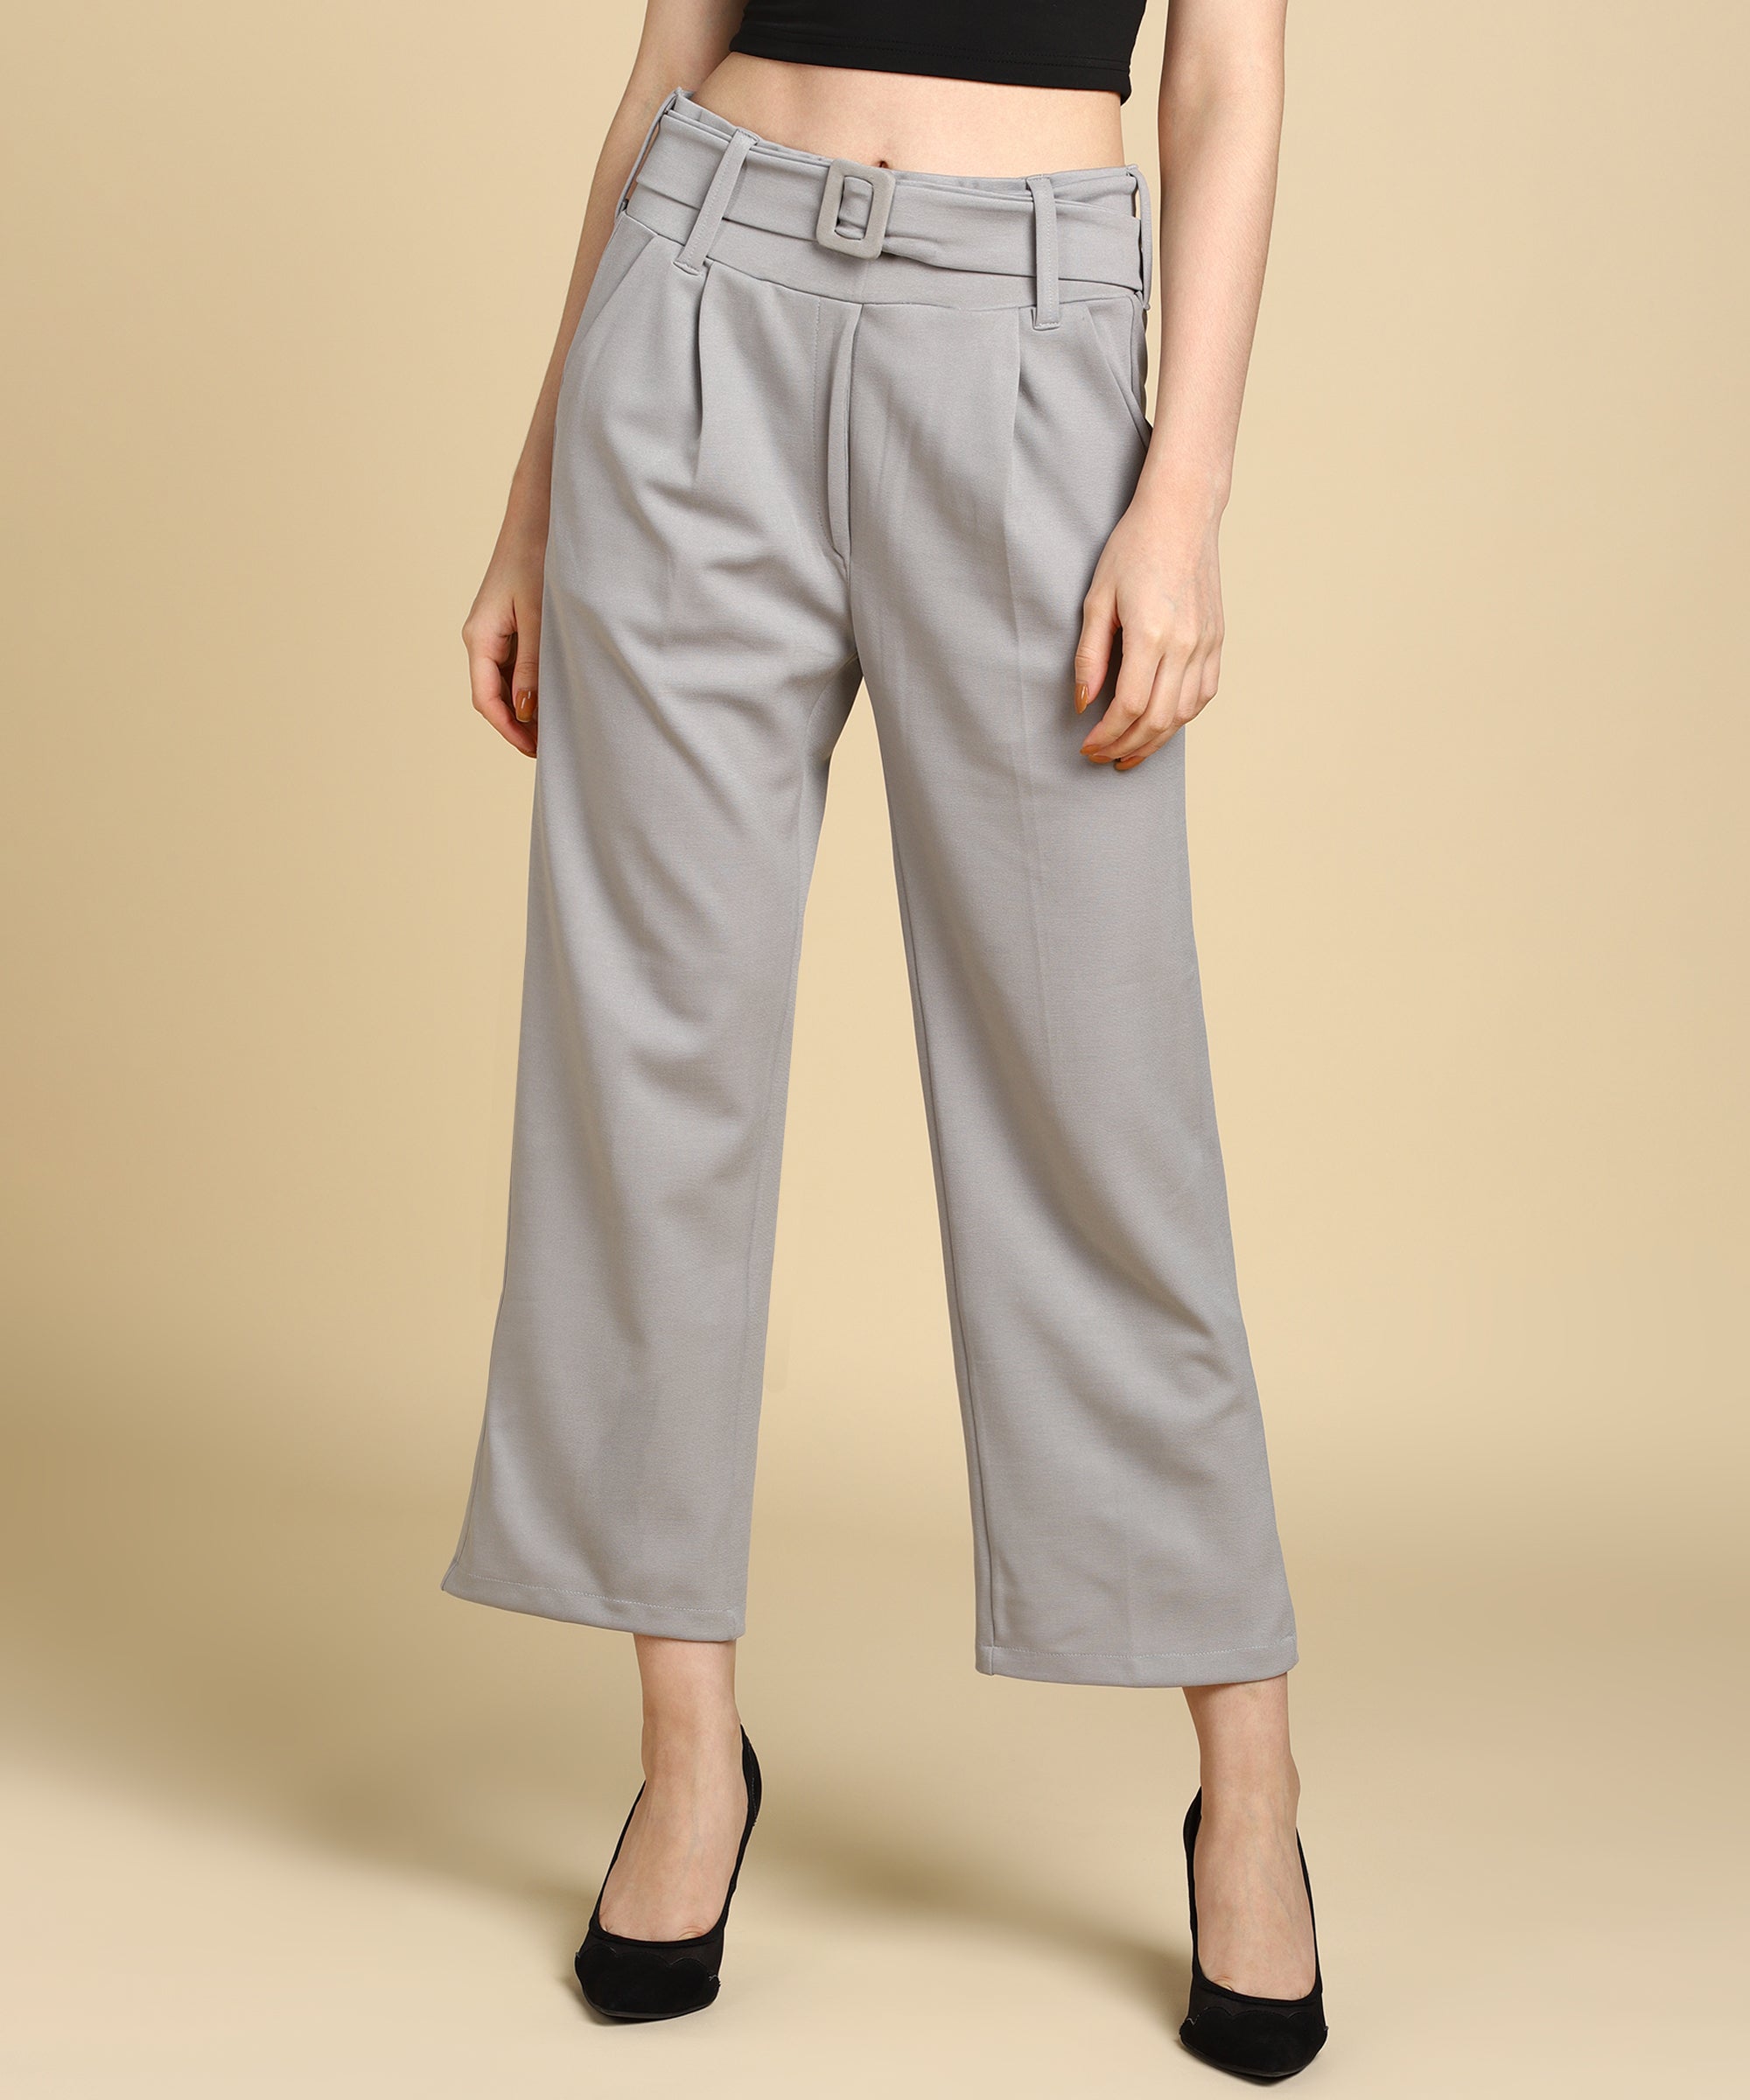 Parallel Jeans in Cord Sand | High waisted trousers, Corduroy pants women,  Fashion